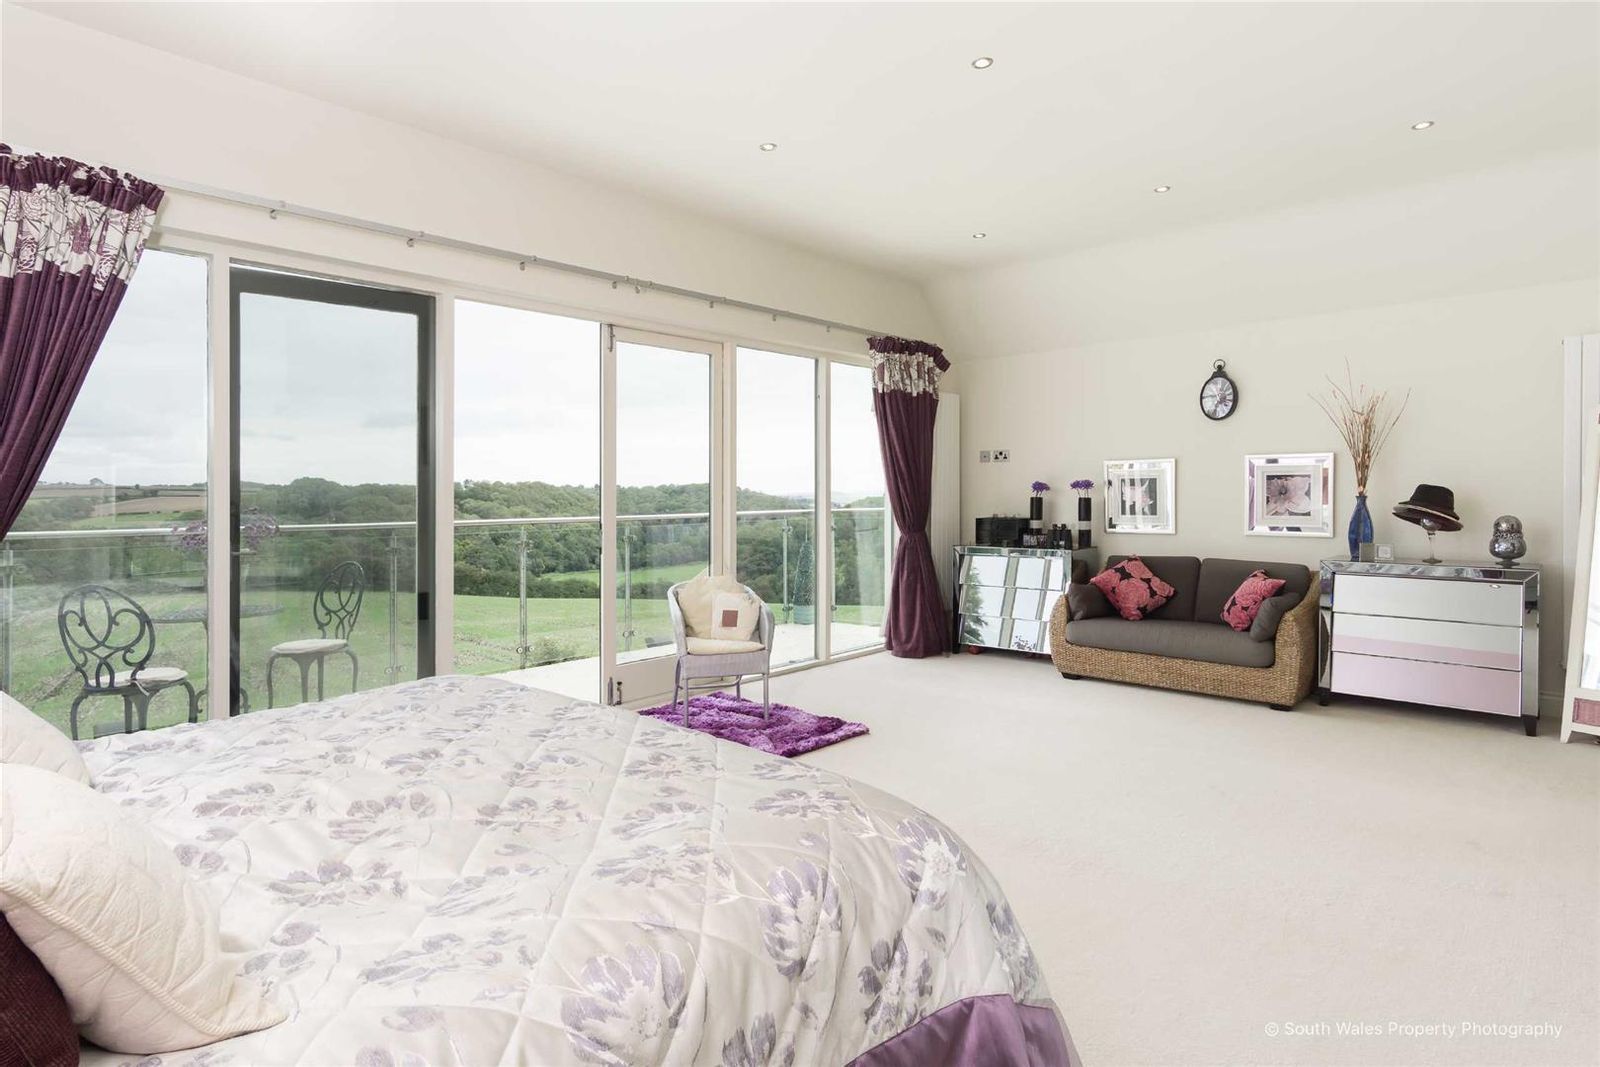 (Picture: Brinsons & Birt/Zoopla)